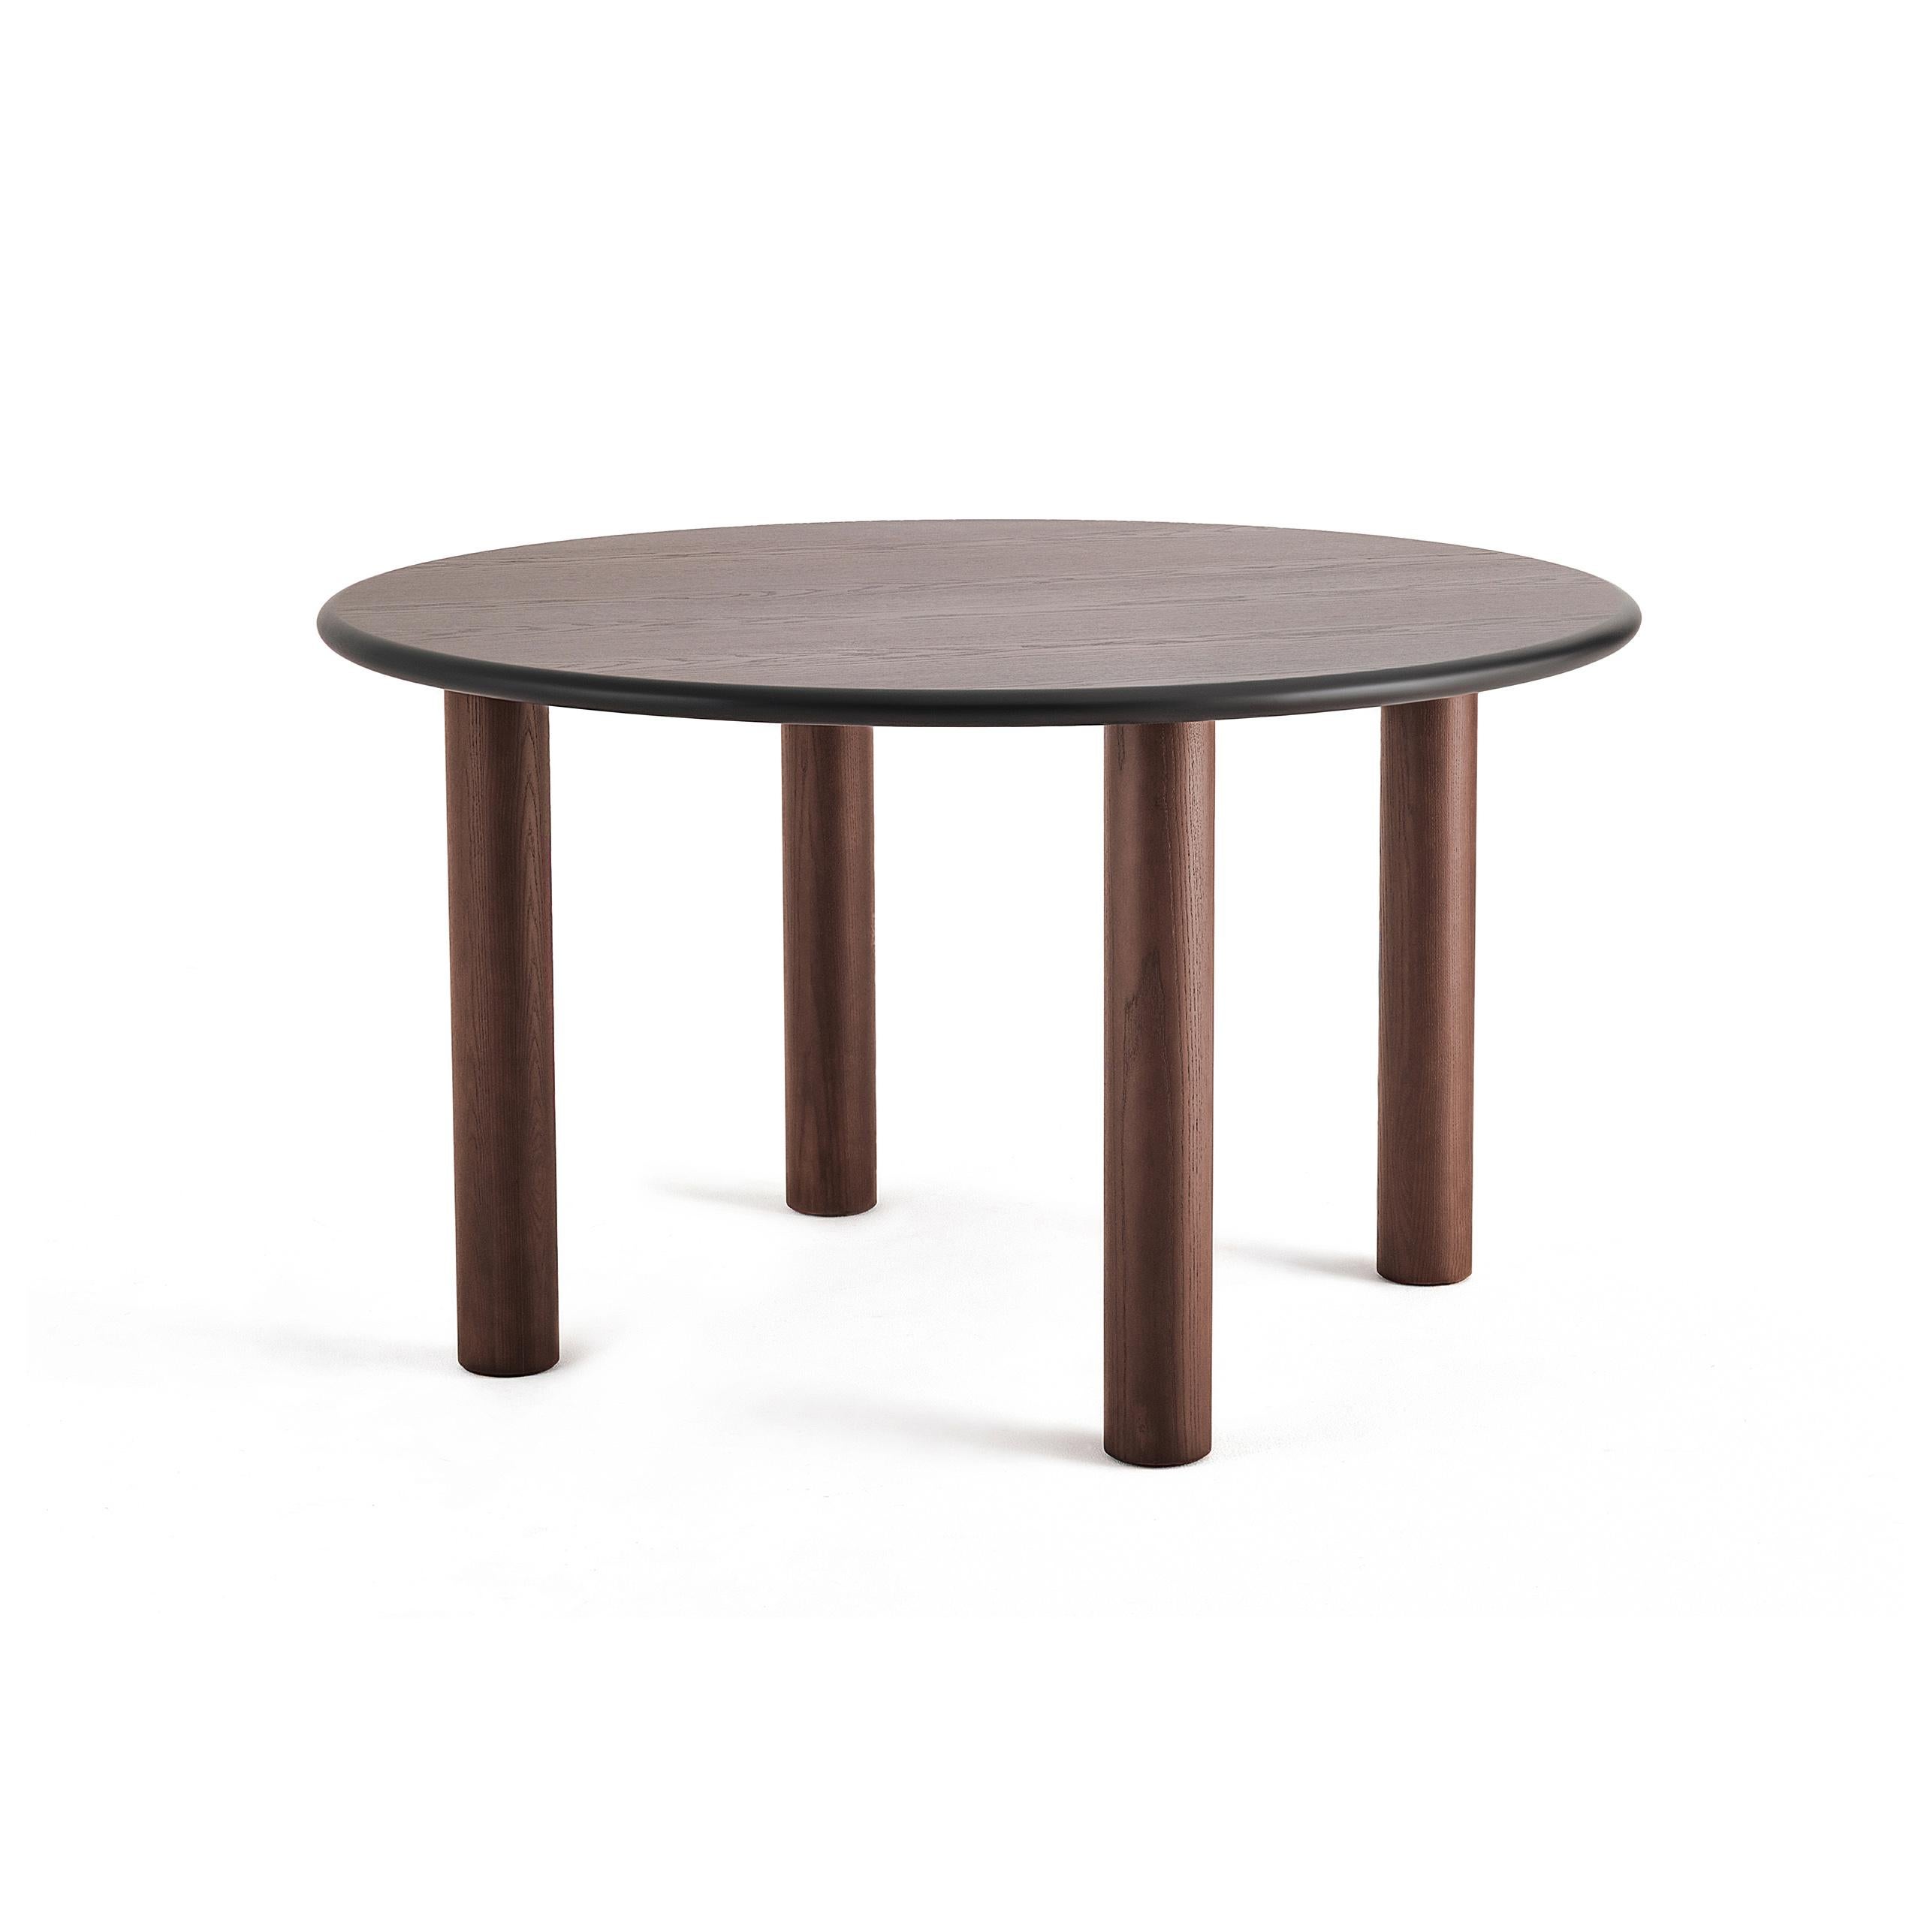 Dining round table 'PAUL' by Noom
Designer: Kateryna Sokolova

Colors: black stained, brown stained, natural

Model shown in picture: brown. Stained.
Dimensions: H 71 cm, Ø 130 cm

The table's design is a 